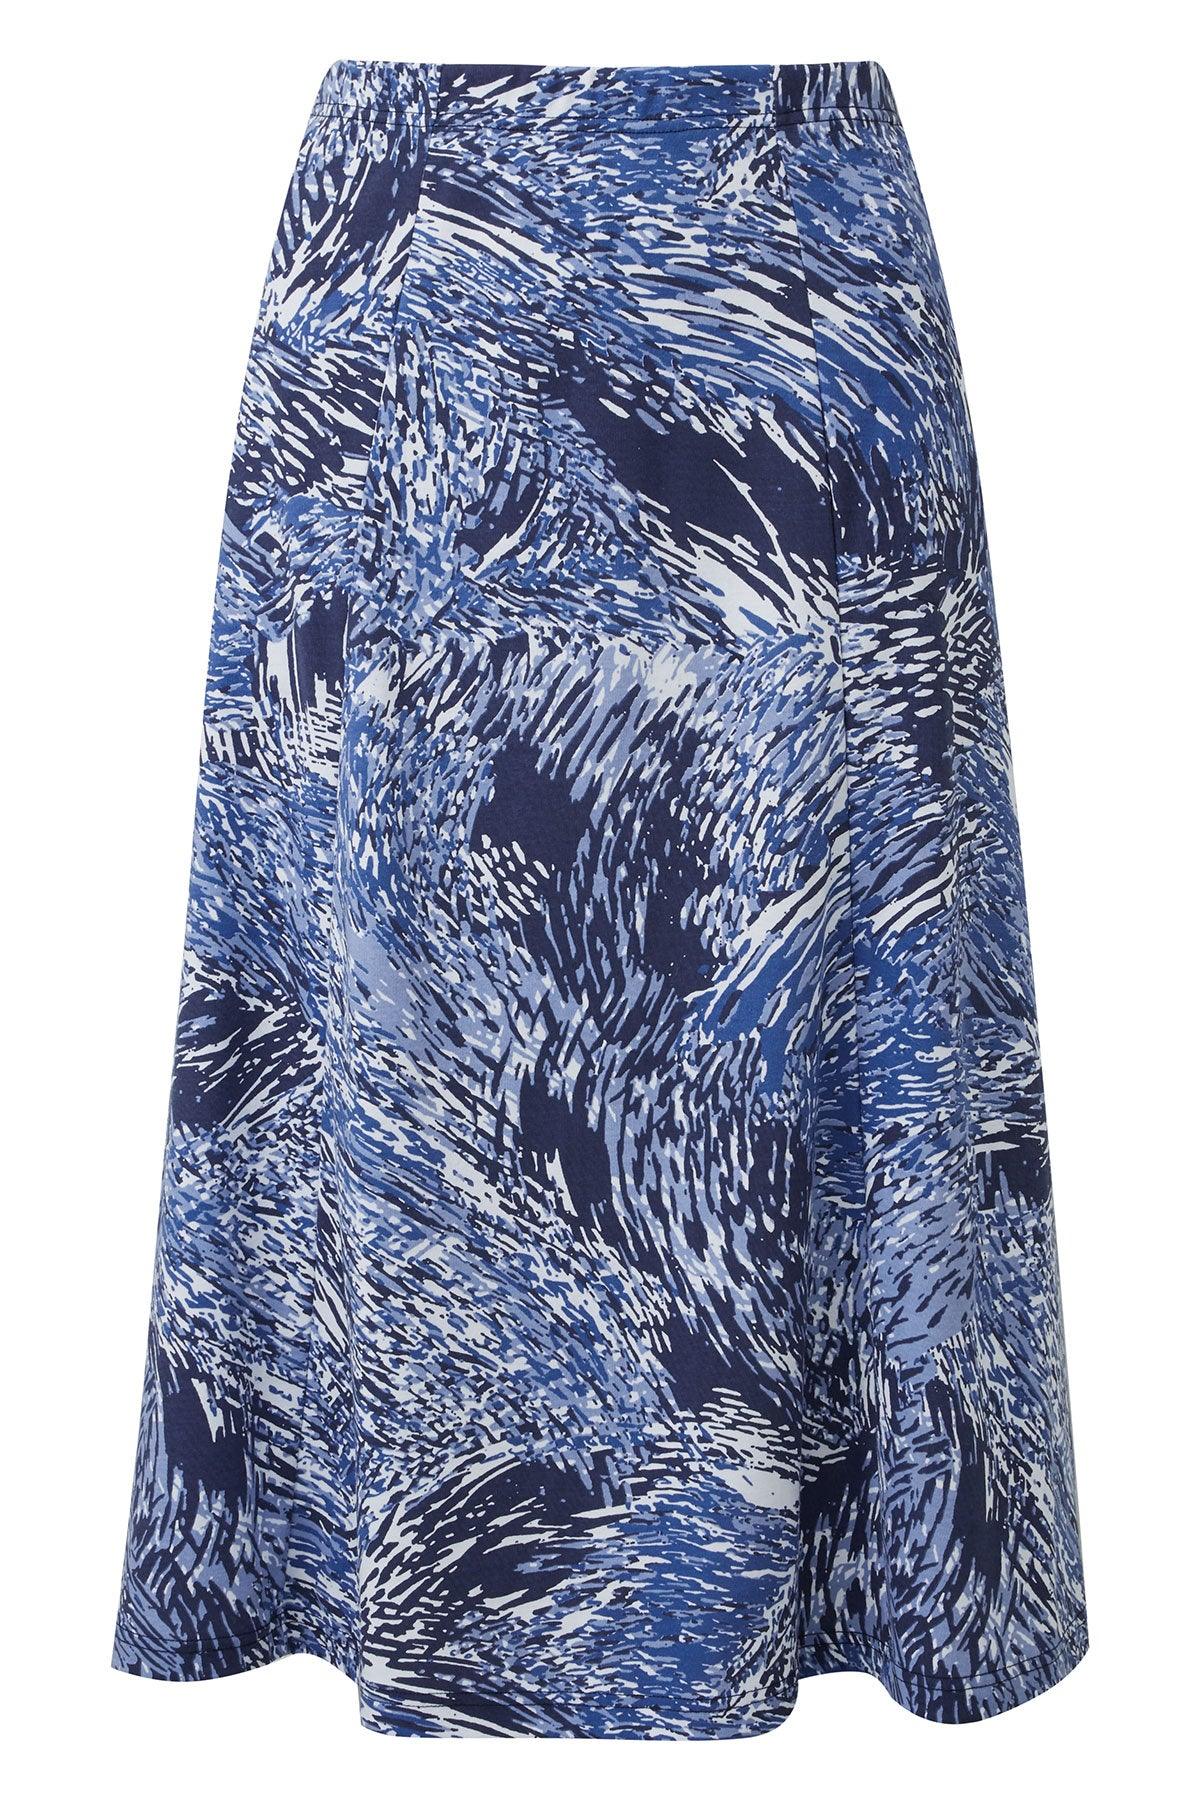 Poppy Abstract Skirt - Carr & Westley